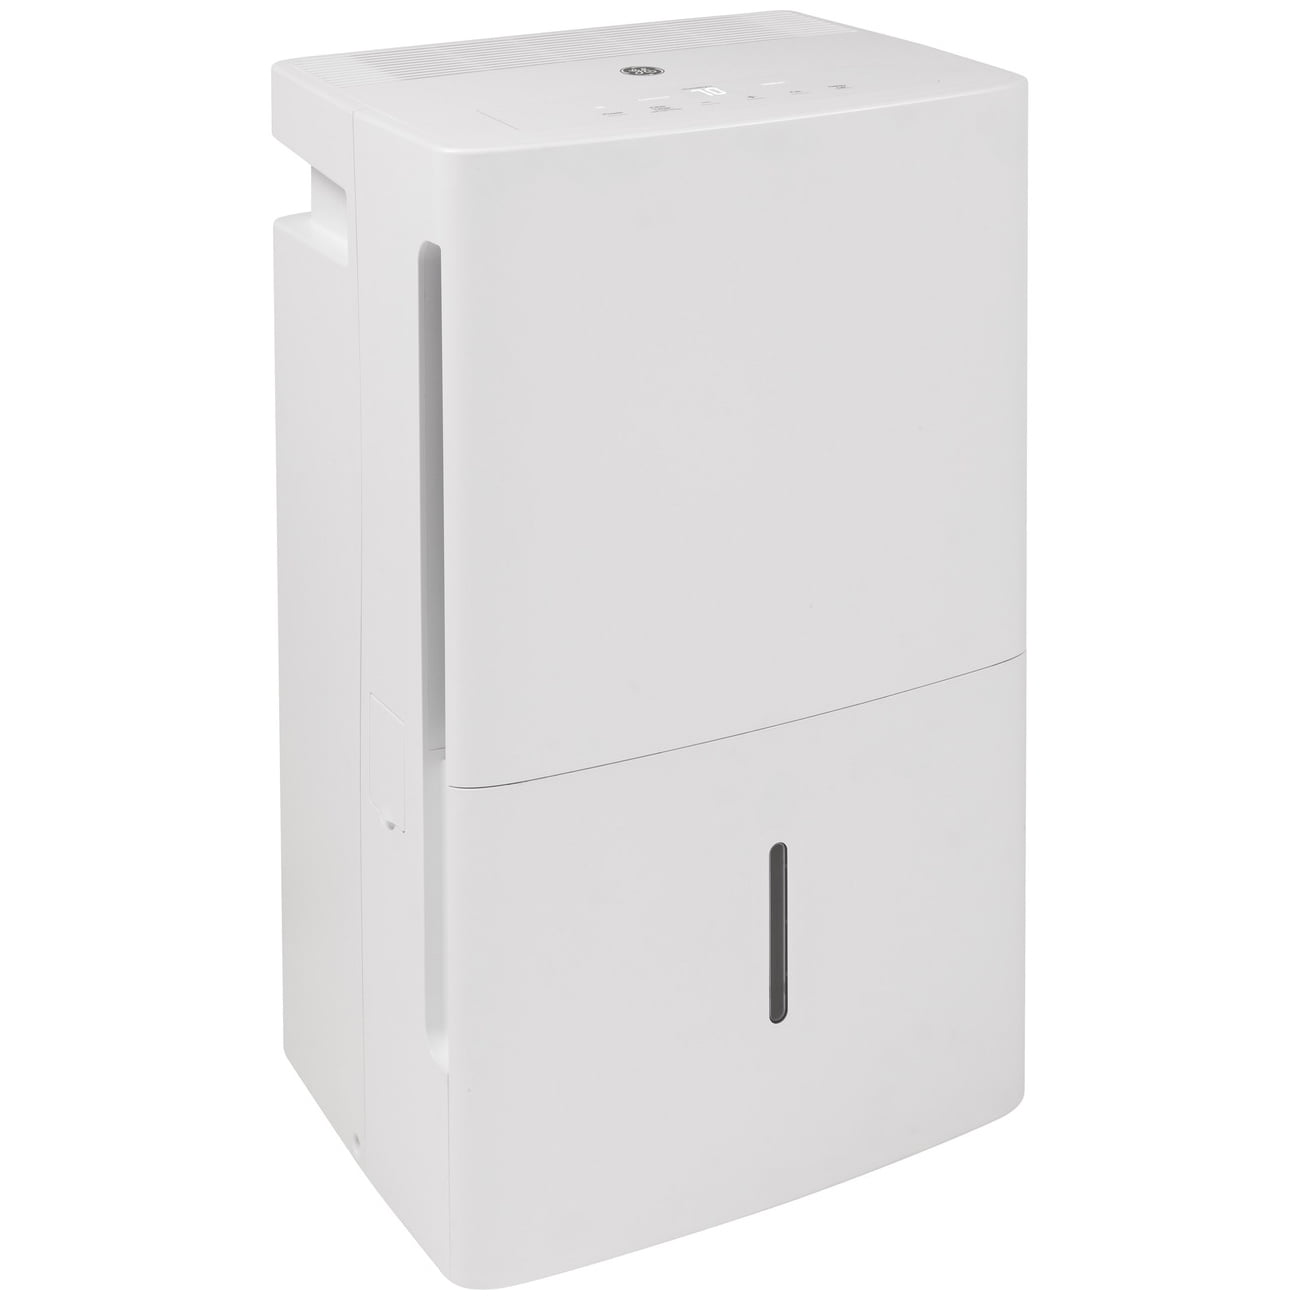 Honeywell 70-Pint Energy Star Dehumidifier with Wi-Fi Connectivity -  National Grid Marketplace - RI Home